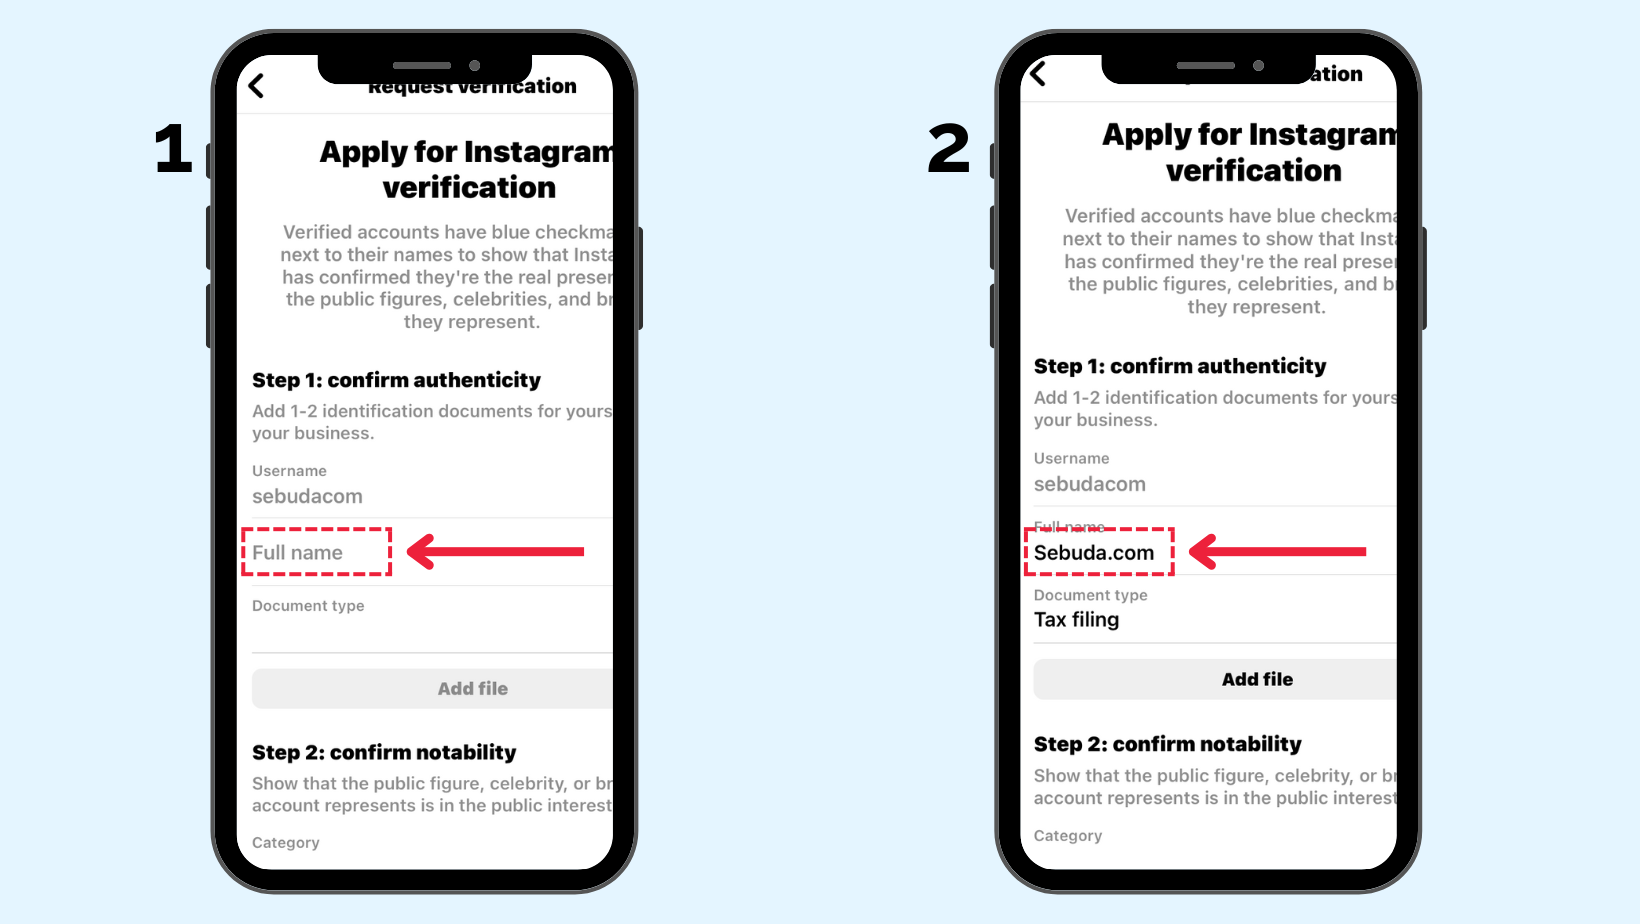 Confirm authenticity to get verified on Instagram